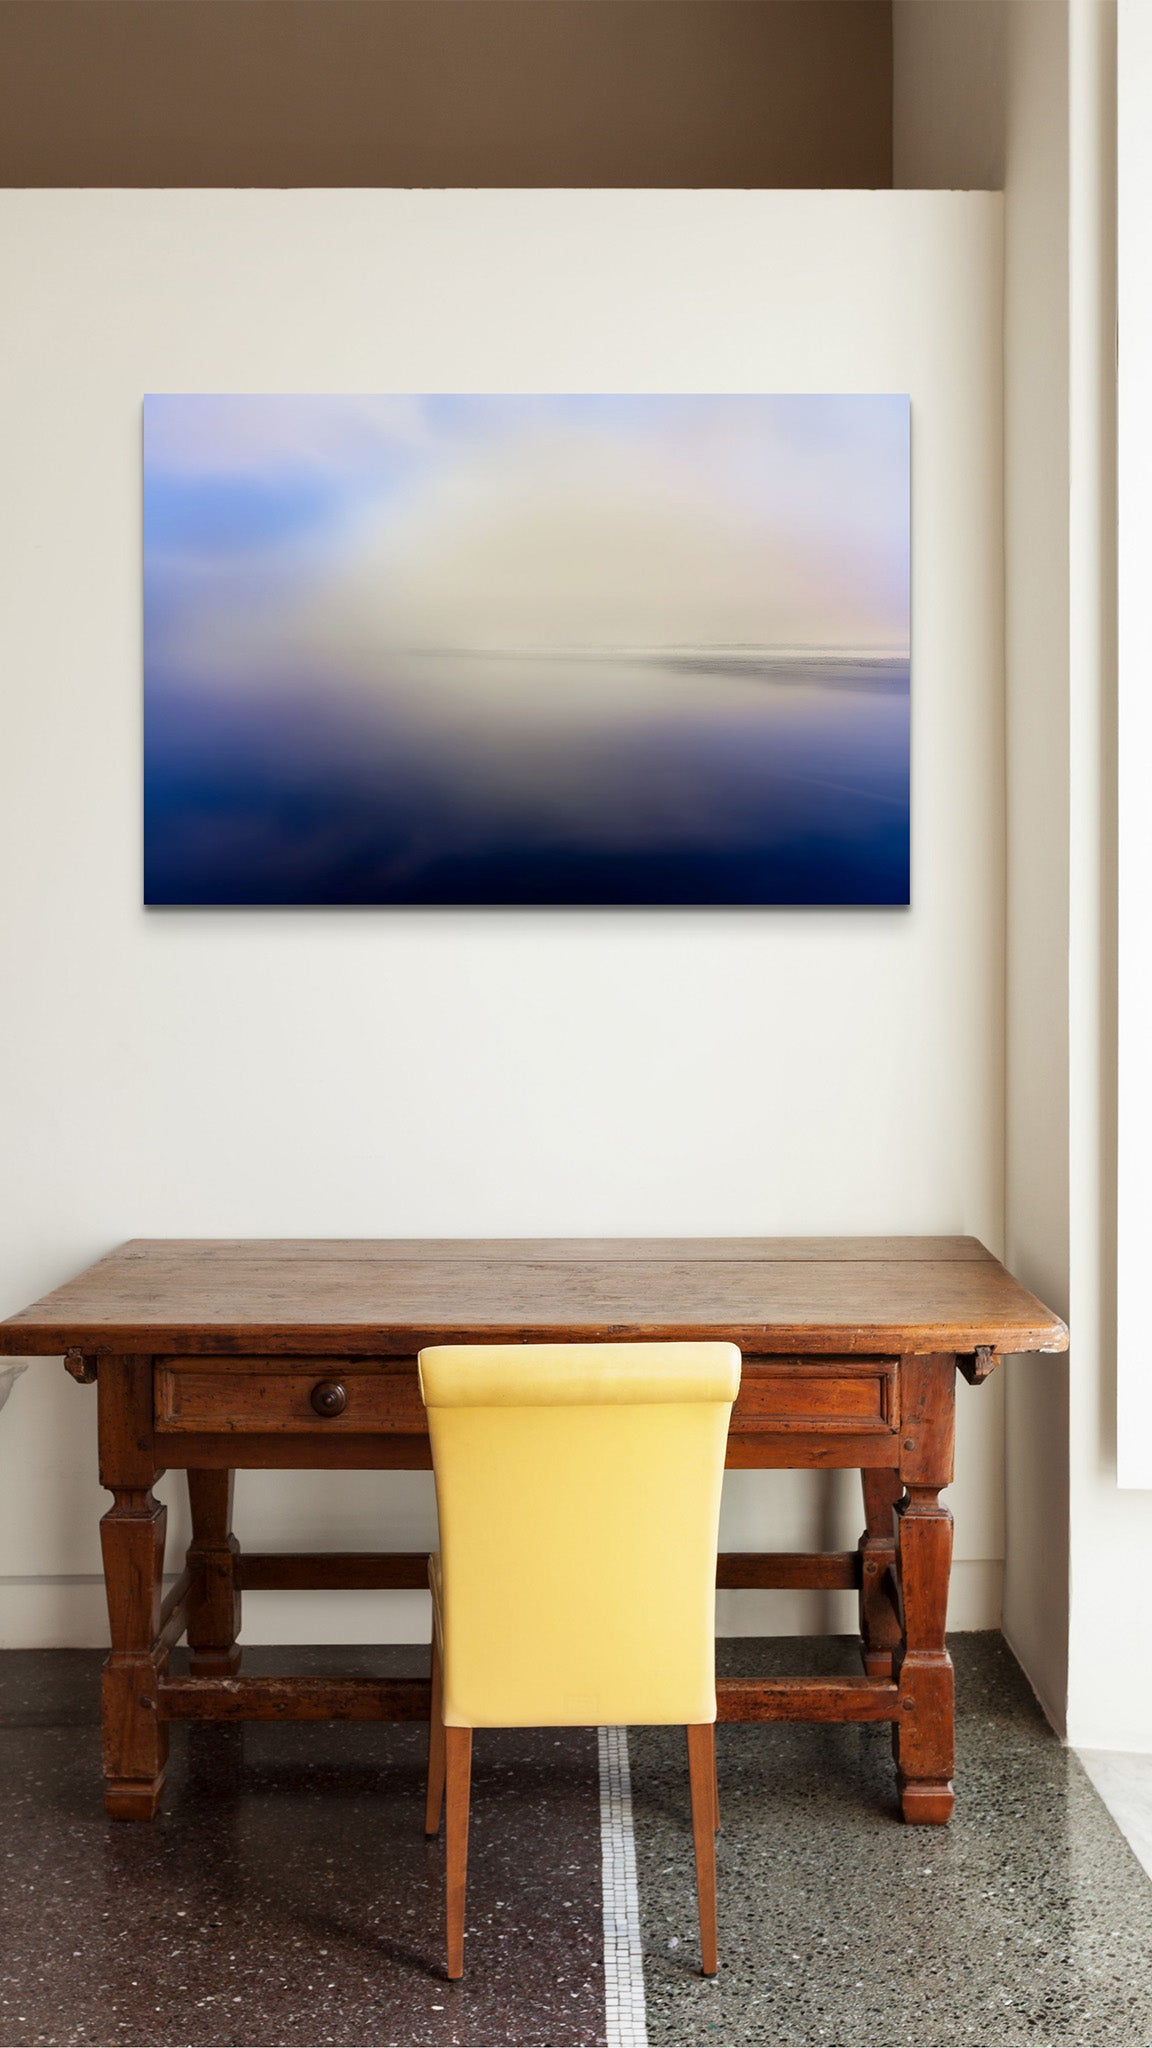 Picture hanging on the wall of an office over a desk. The picture is a fine art landscape photograph titled "Go Toward the Light" by Cameron Dreaux of Dreaux Fine Art.